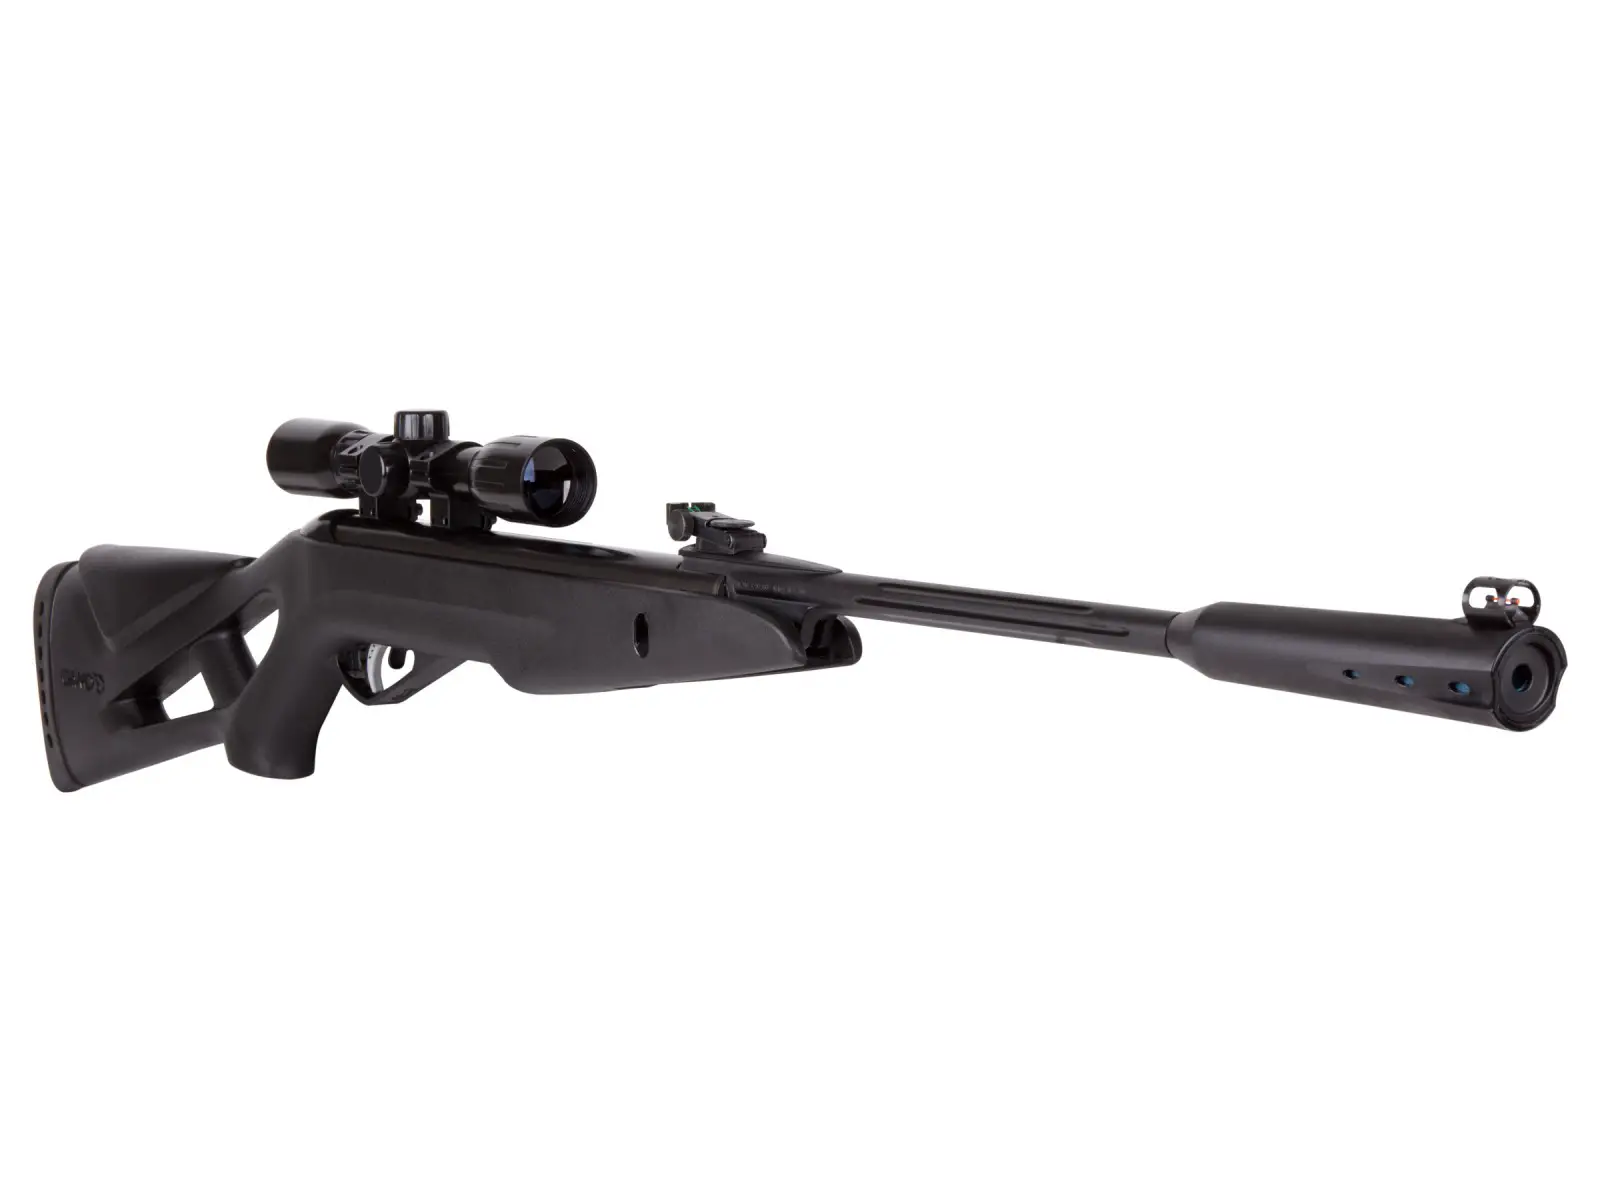 whispersilent Best Break Barrel Air Rifle That Hits Like A Champ (Reviews and Buying Guide 2023)